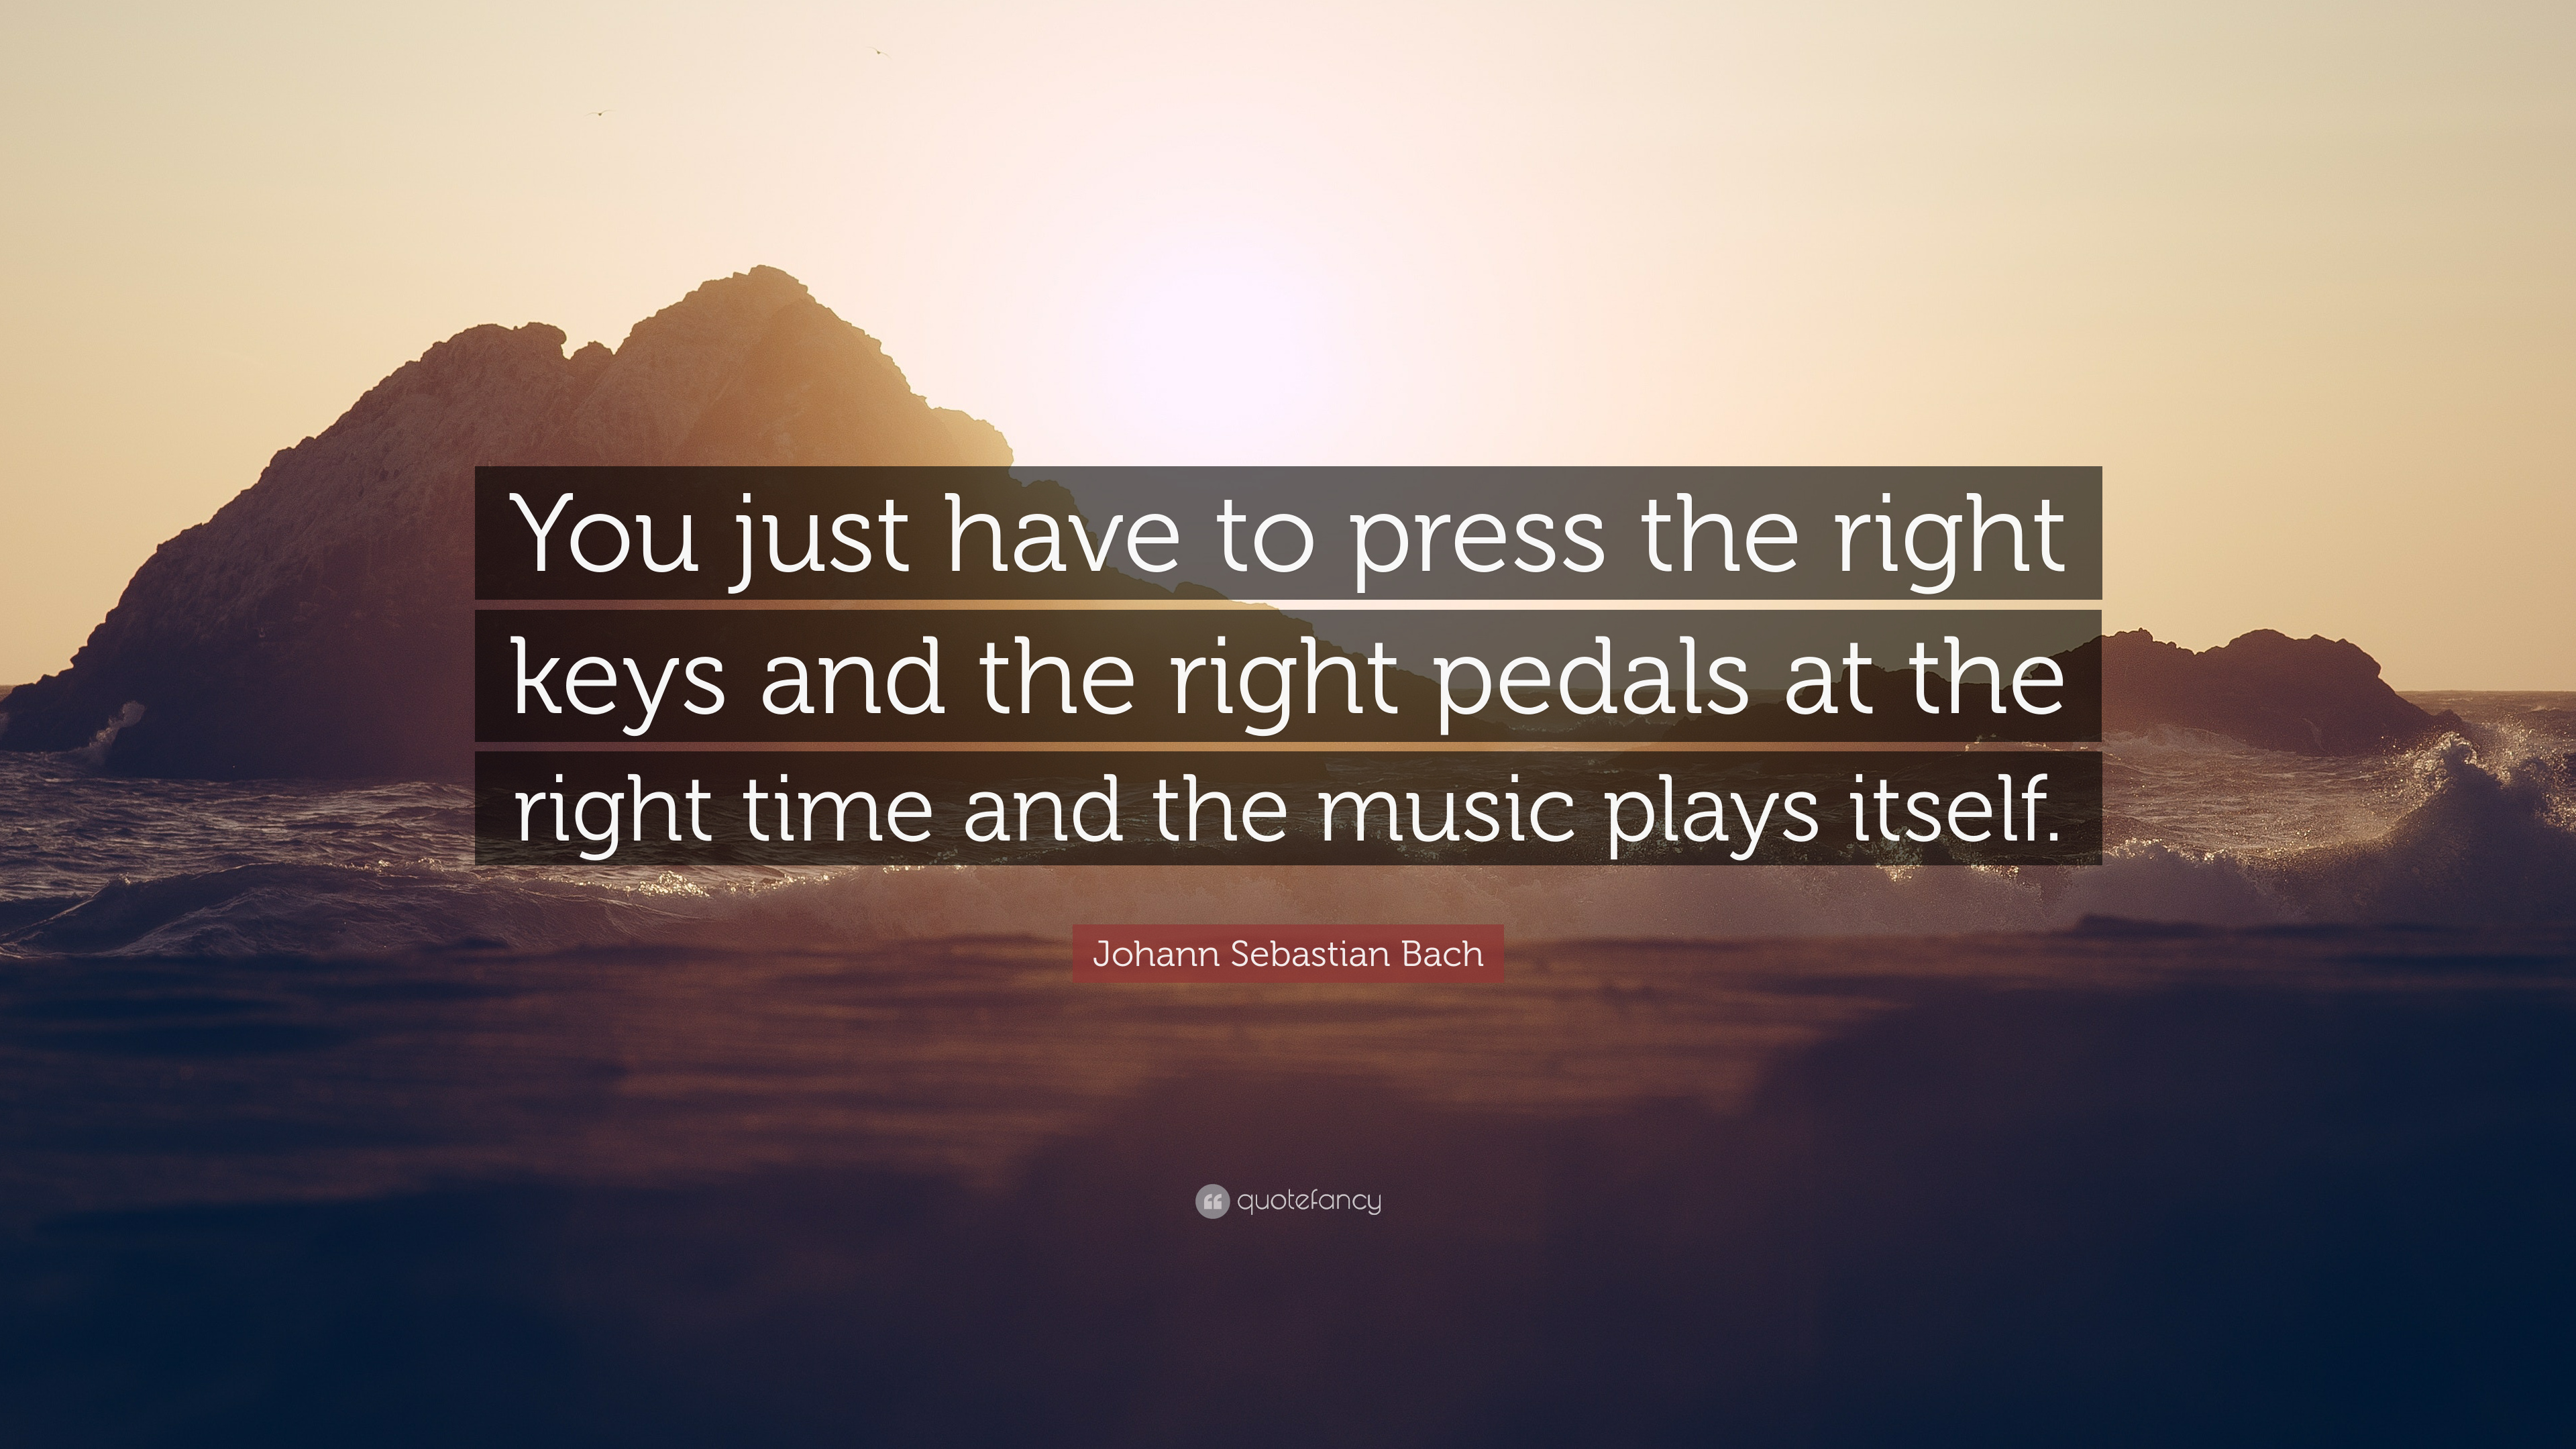 Johann Sebastian Bach Quote: "You just have to press the 